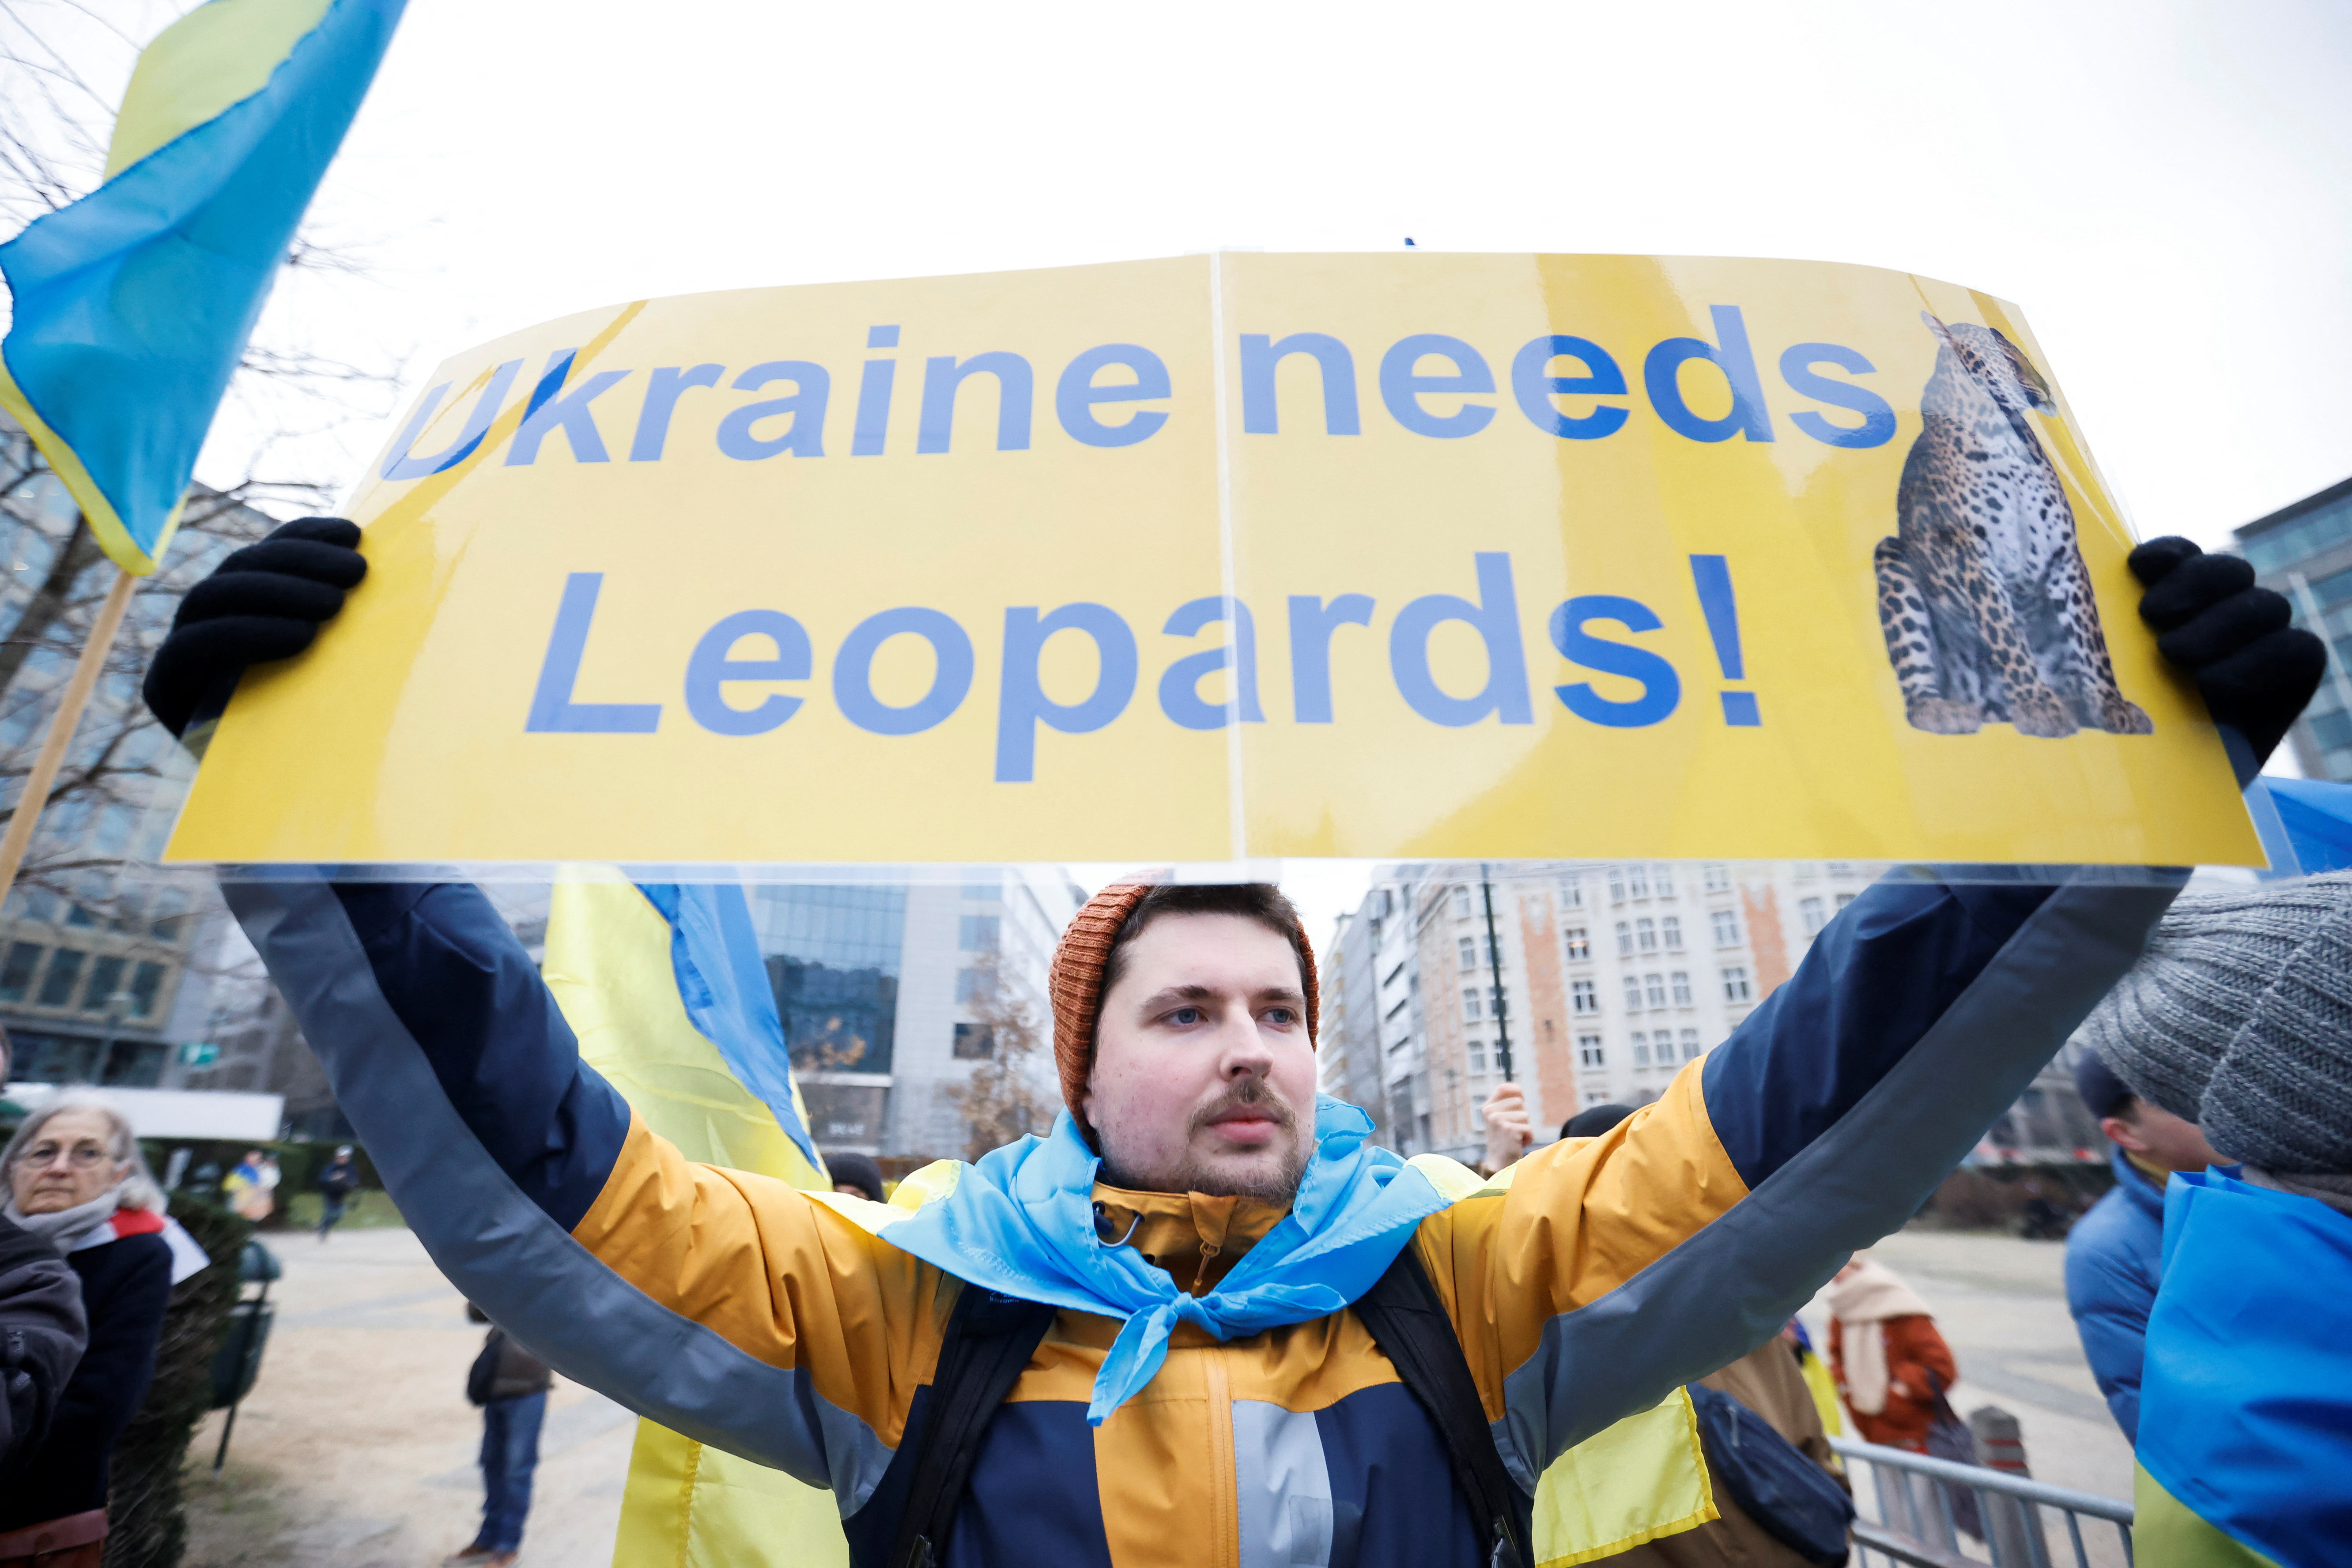 Ukrainian supporters protest during EU foreign ministers' meeting in Brussels